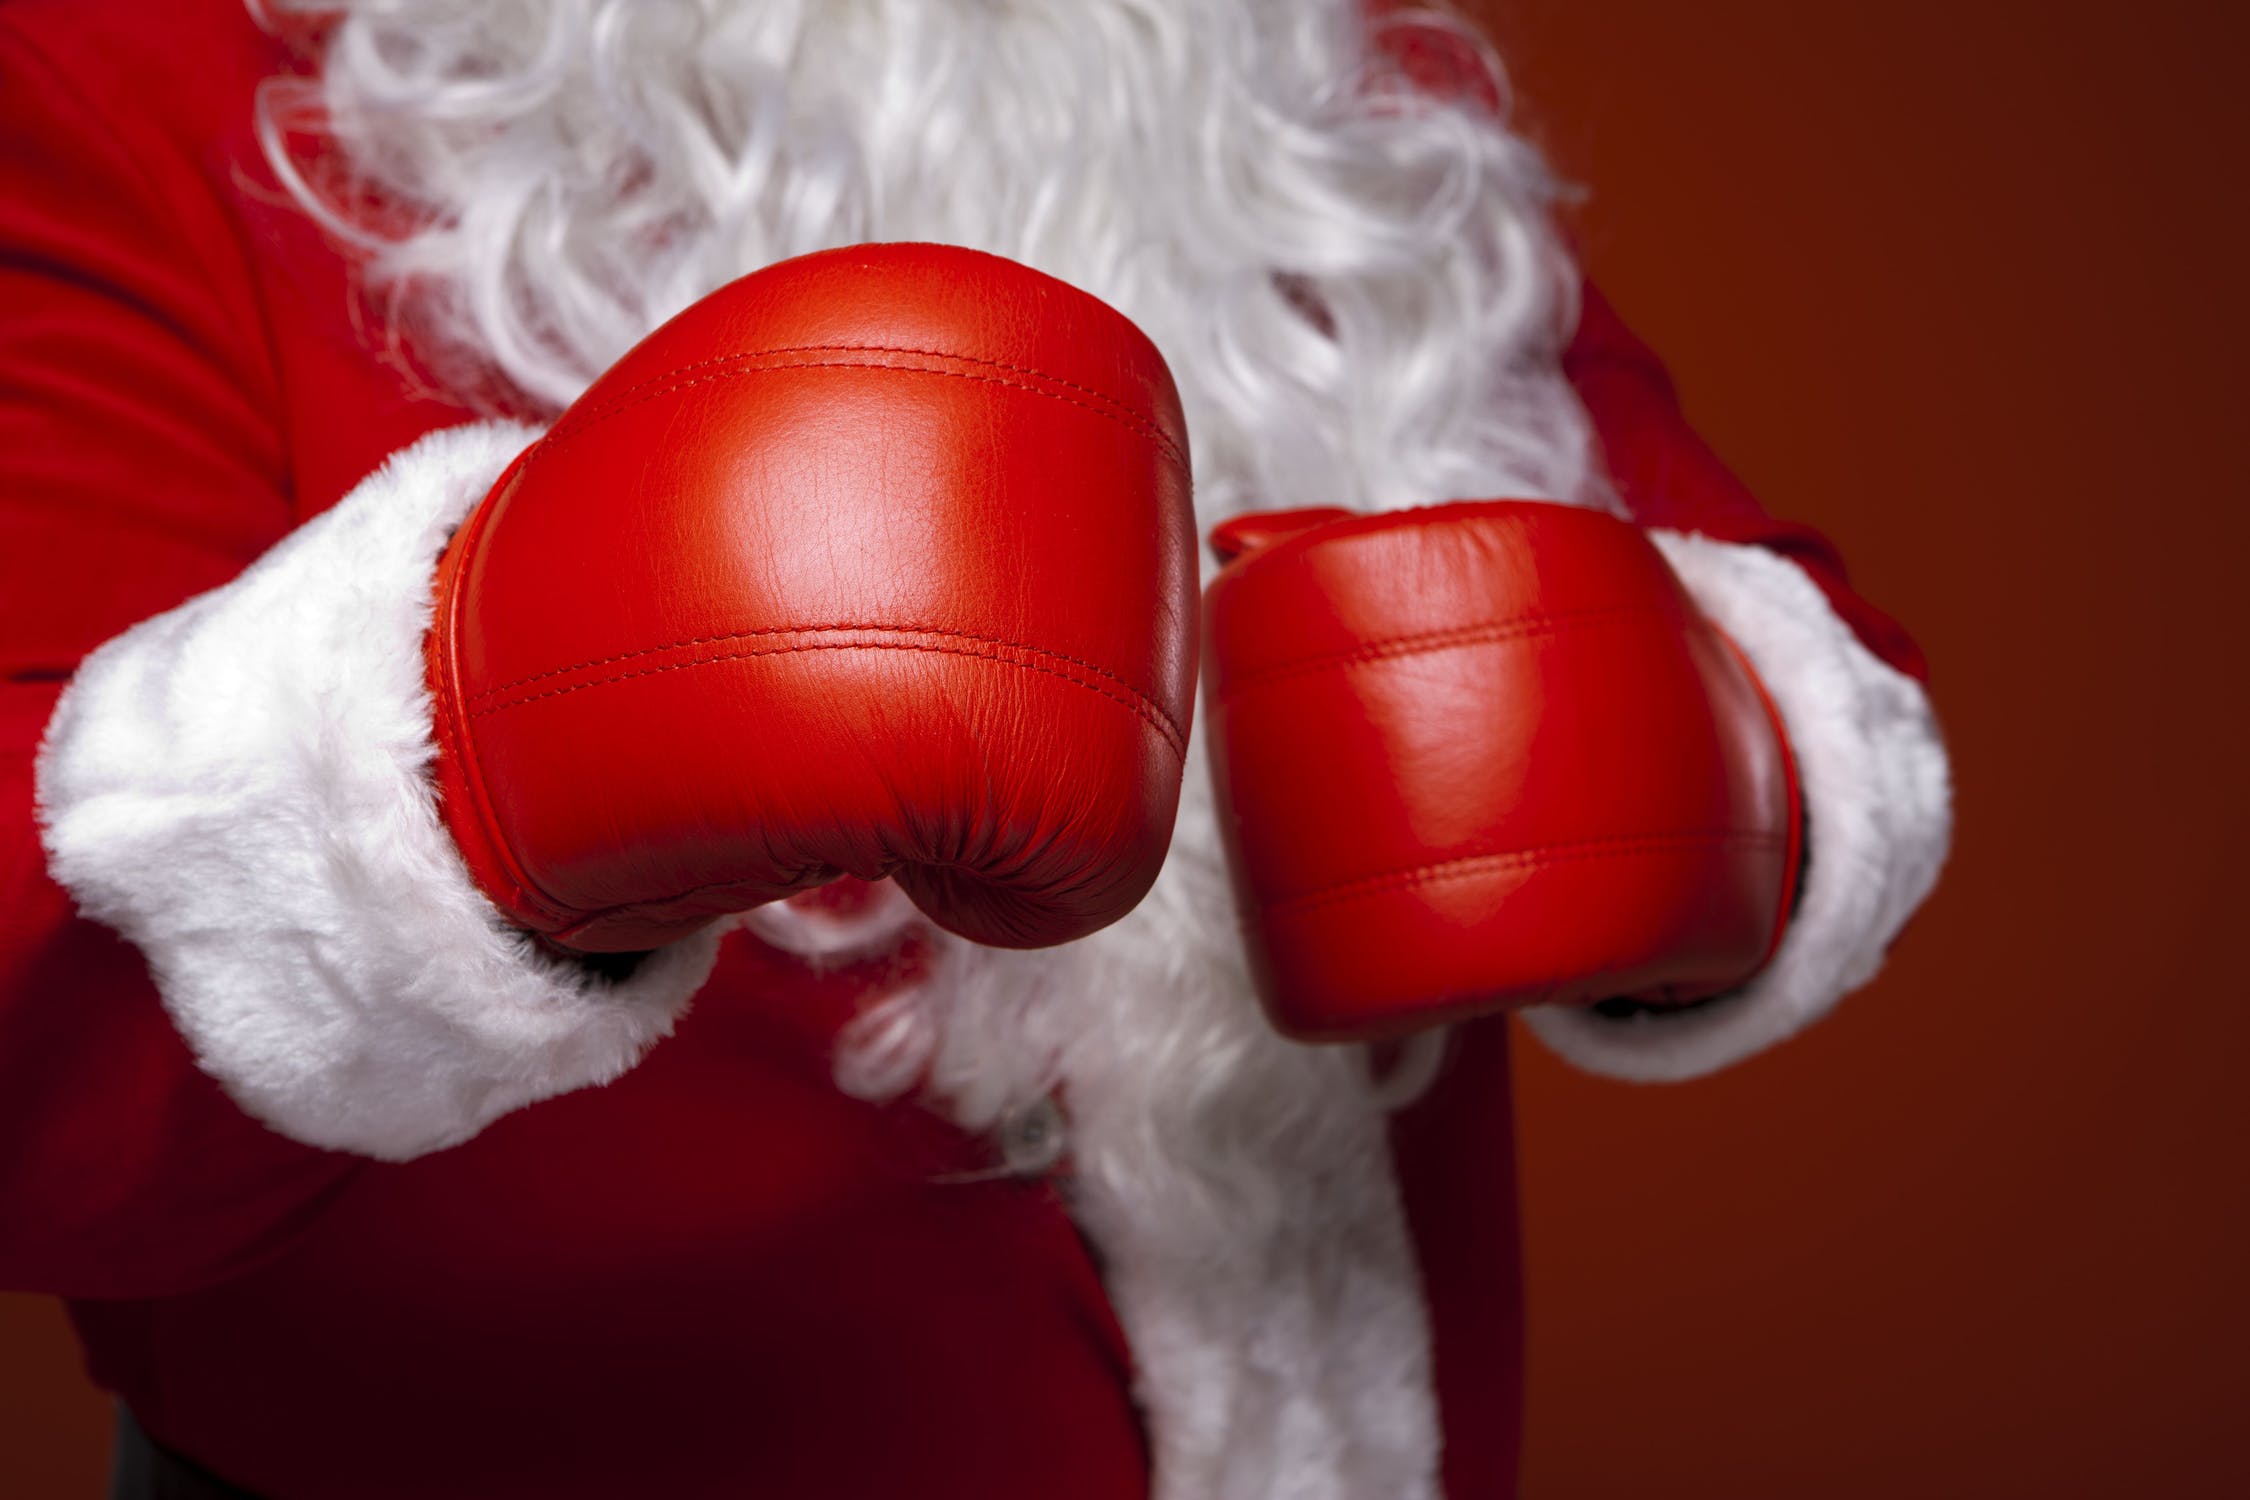 Stock photo of Santa Claus with boxing gloves.